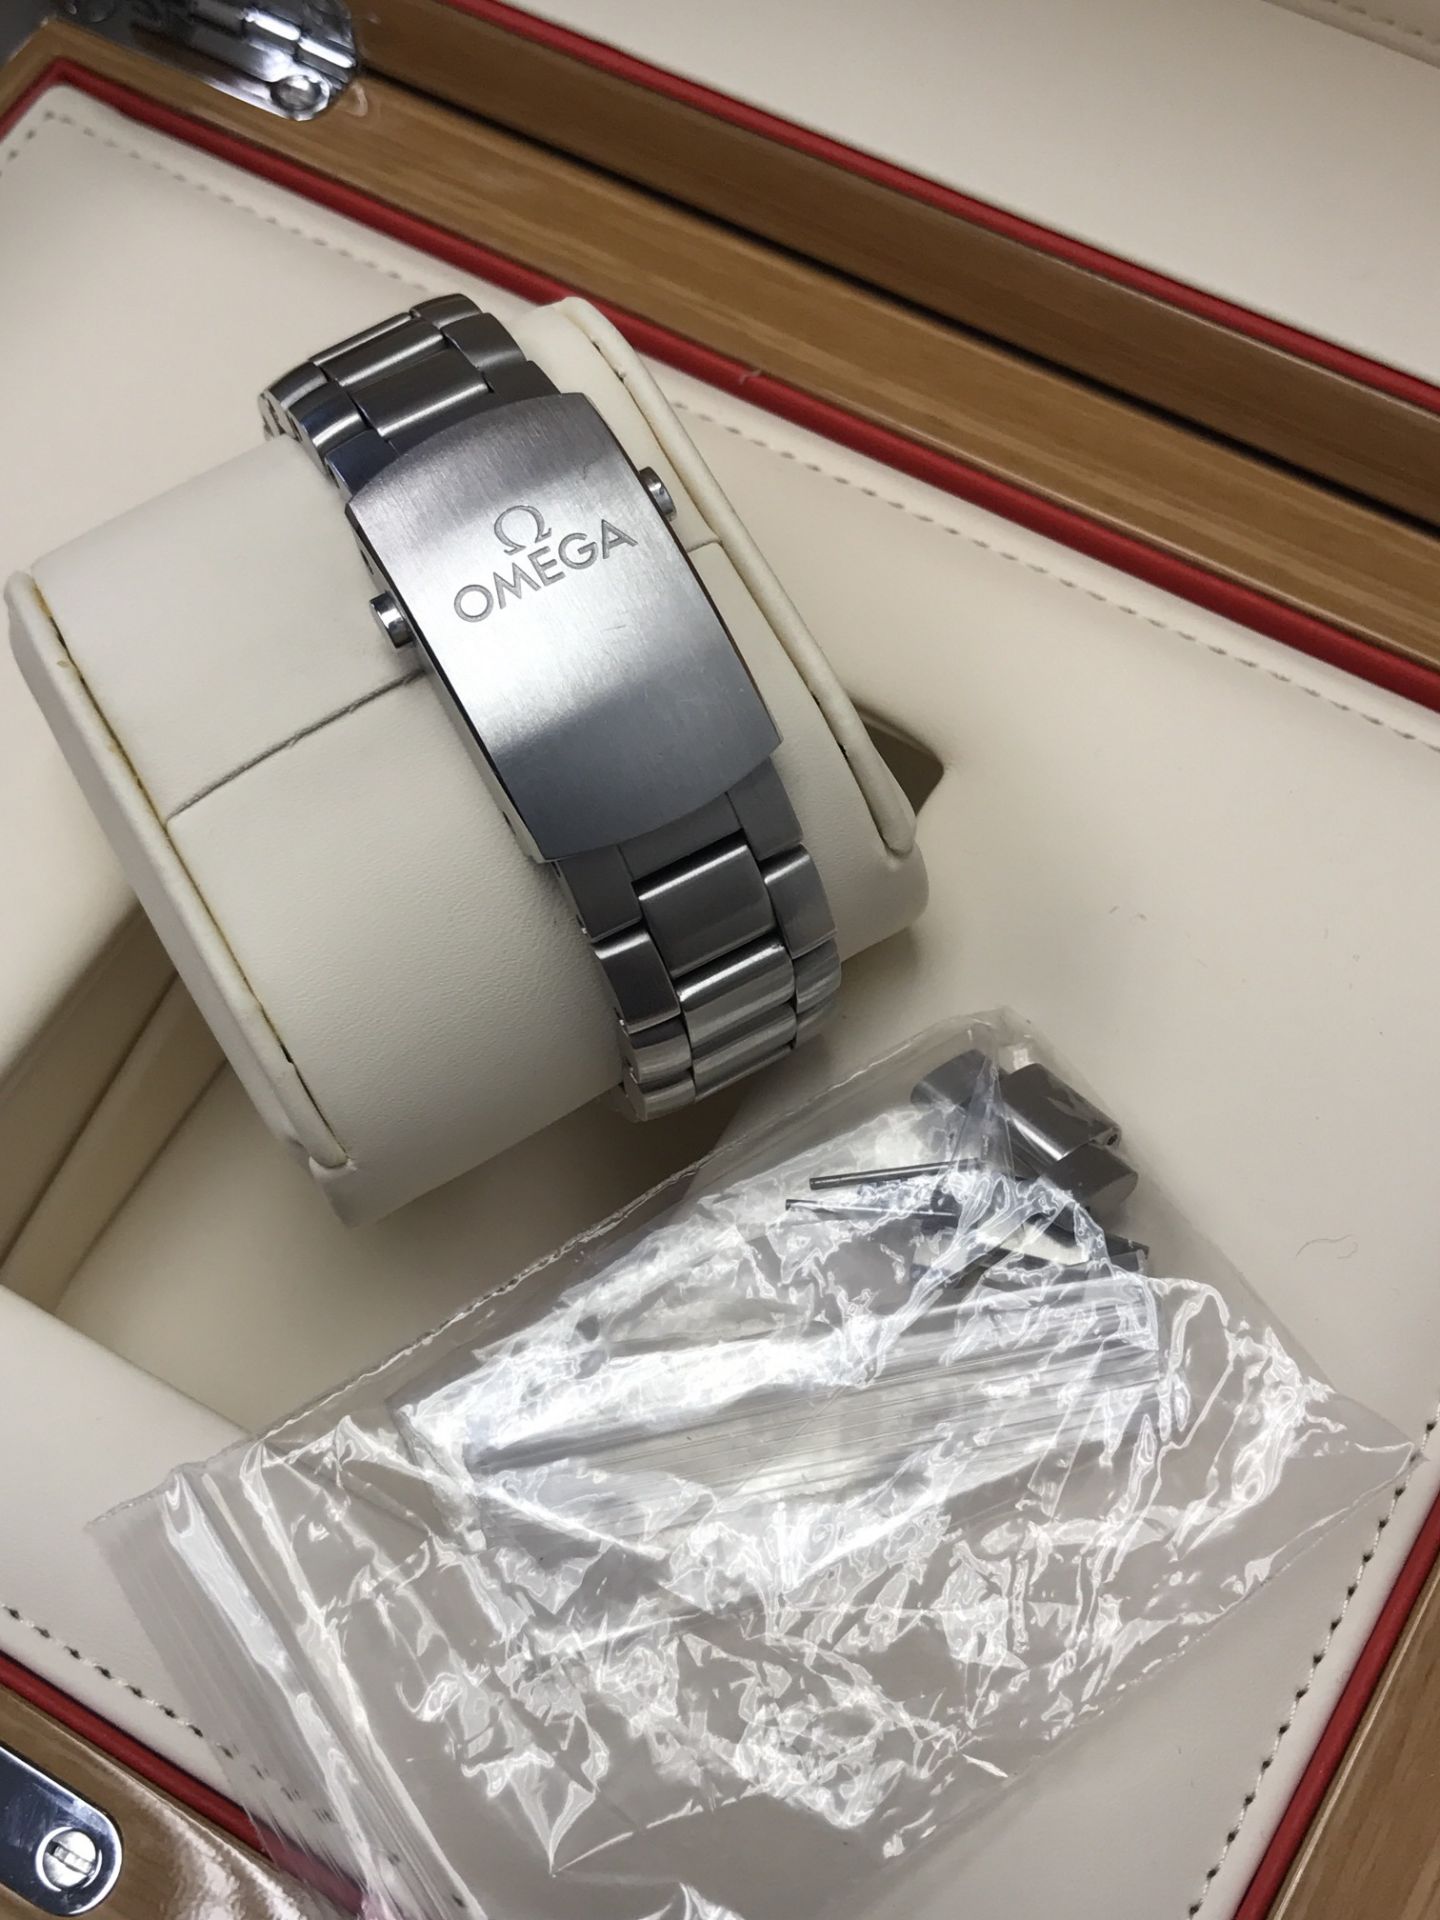 GENTS OMEGA PLANET OCEAN WATCH BOXED WITH PAPERS - Image 3 of 7